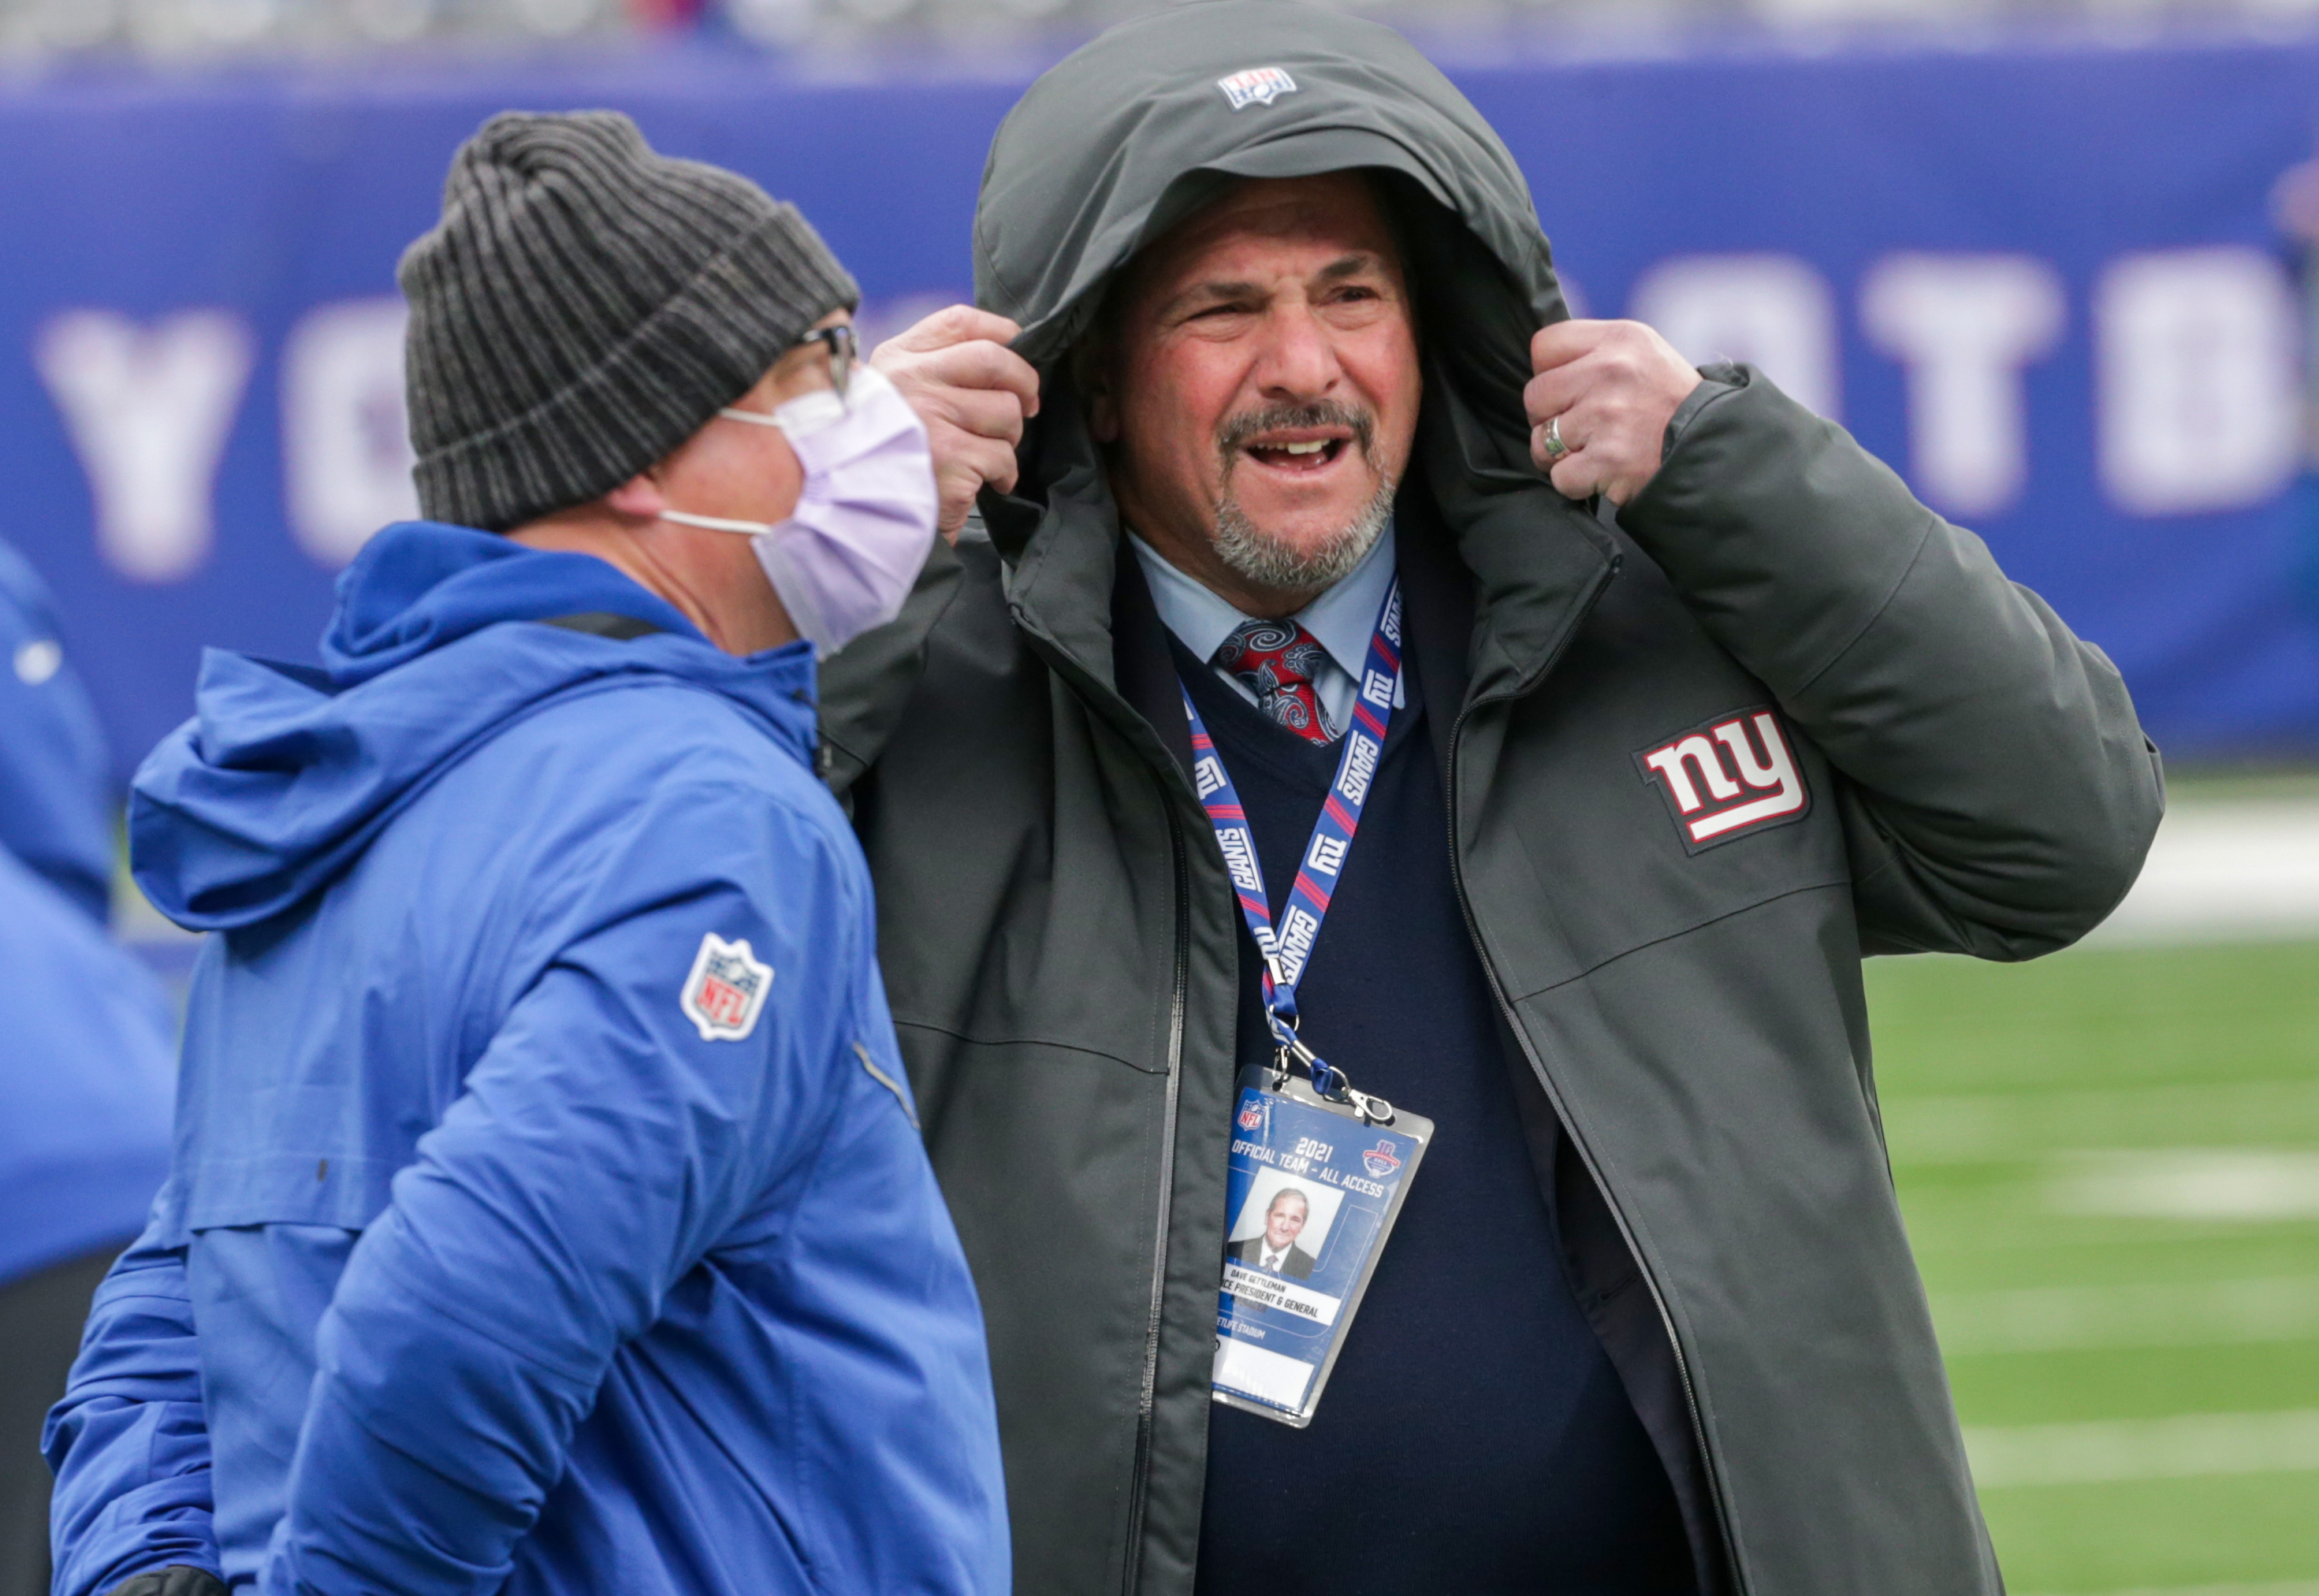 New York Giants VP of Communications Pat Hanlon (left) and general manager Dave Gettleman (right) during pregame warmups as the Giants prepare to host the Washington Football Team on Sunday, Jan. 9, 2022 in East Rutherford, N.J.